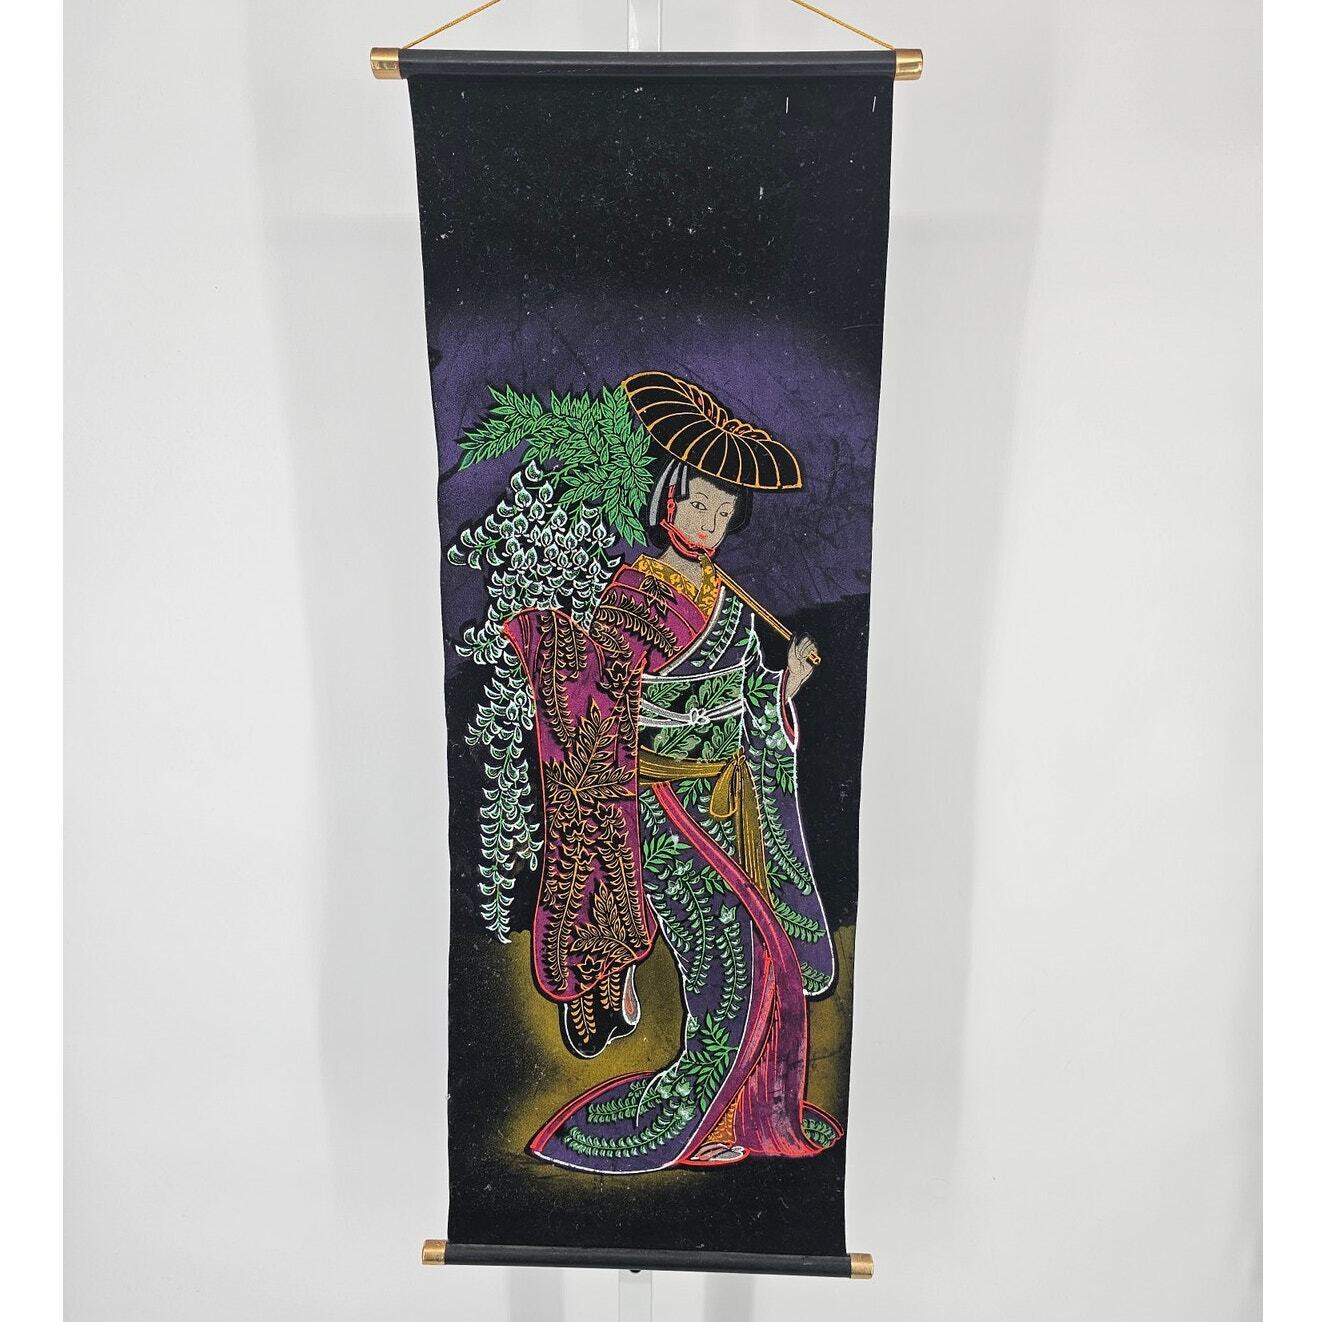 Vintage 1960s Japanese Geisha Wall Hanging Tapestry Velvet Hand Painted Scroll